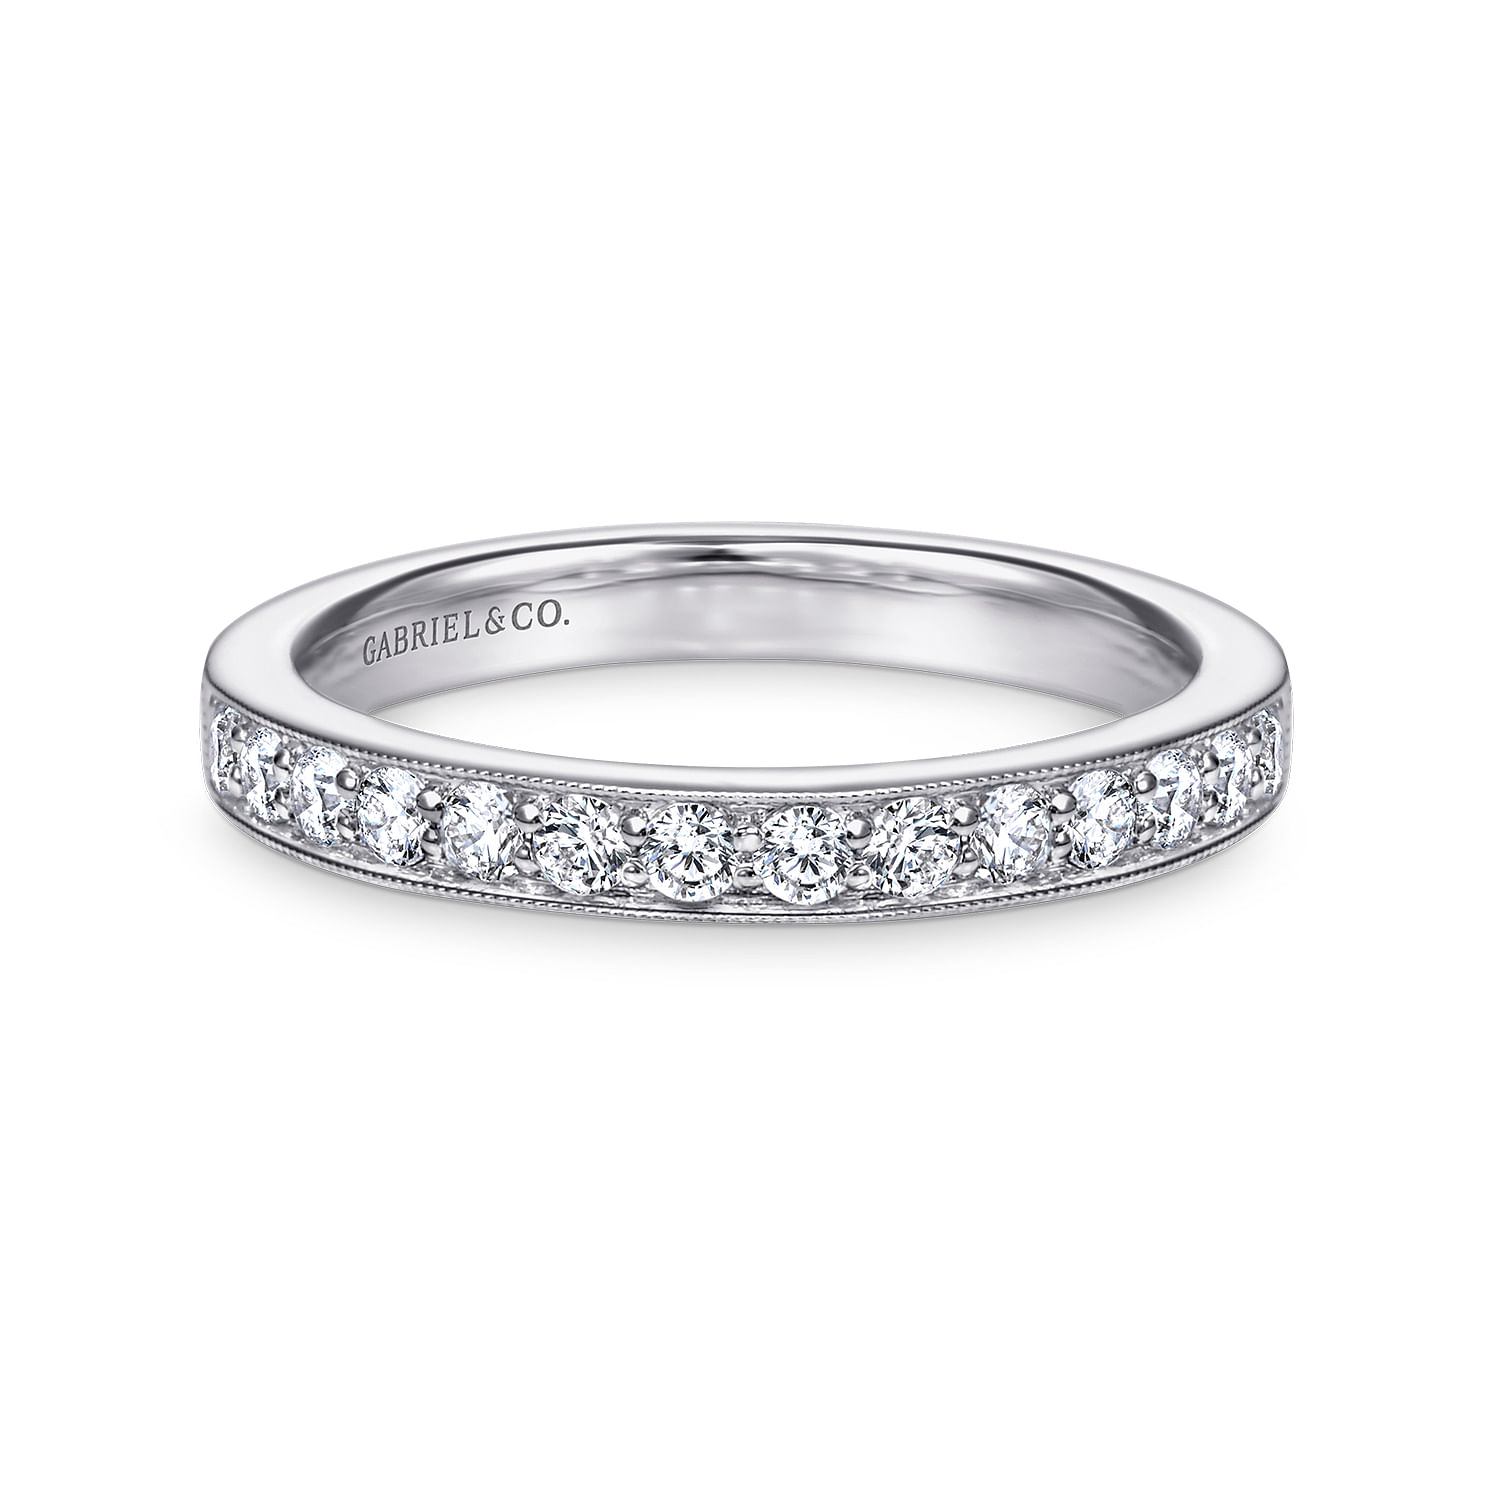 14K White Gold Channel Prong Diamond Wedding Band with Milgrain